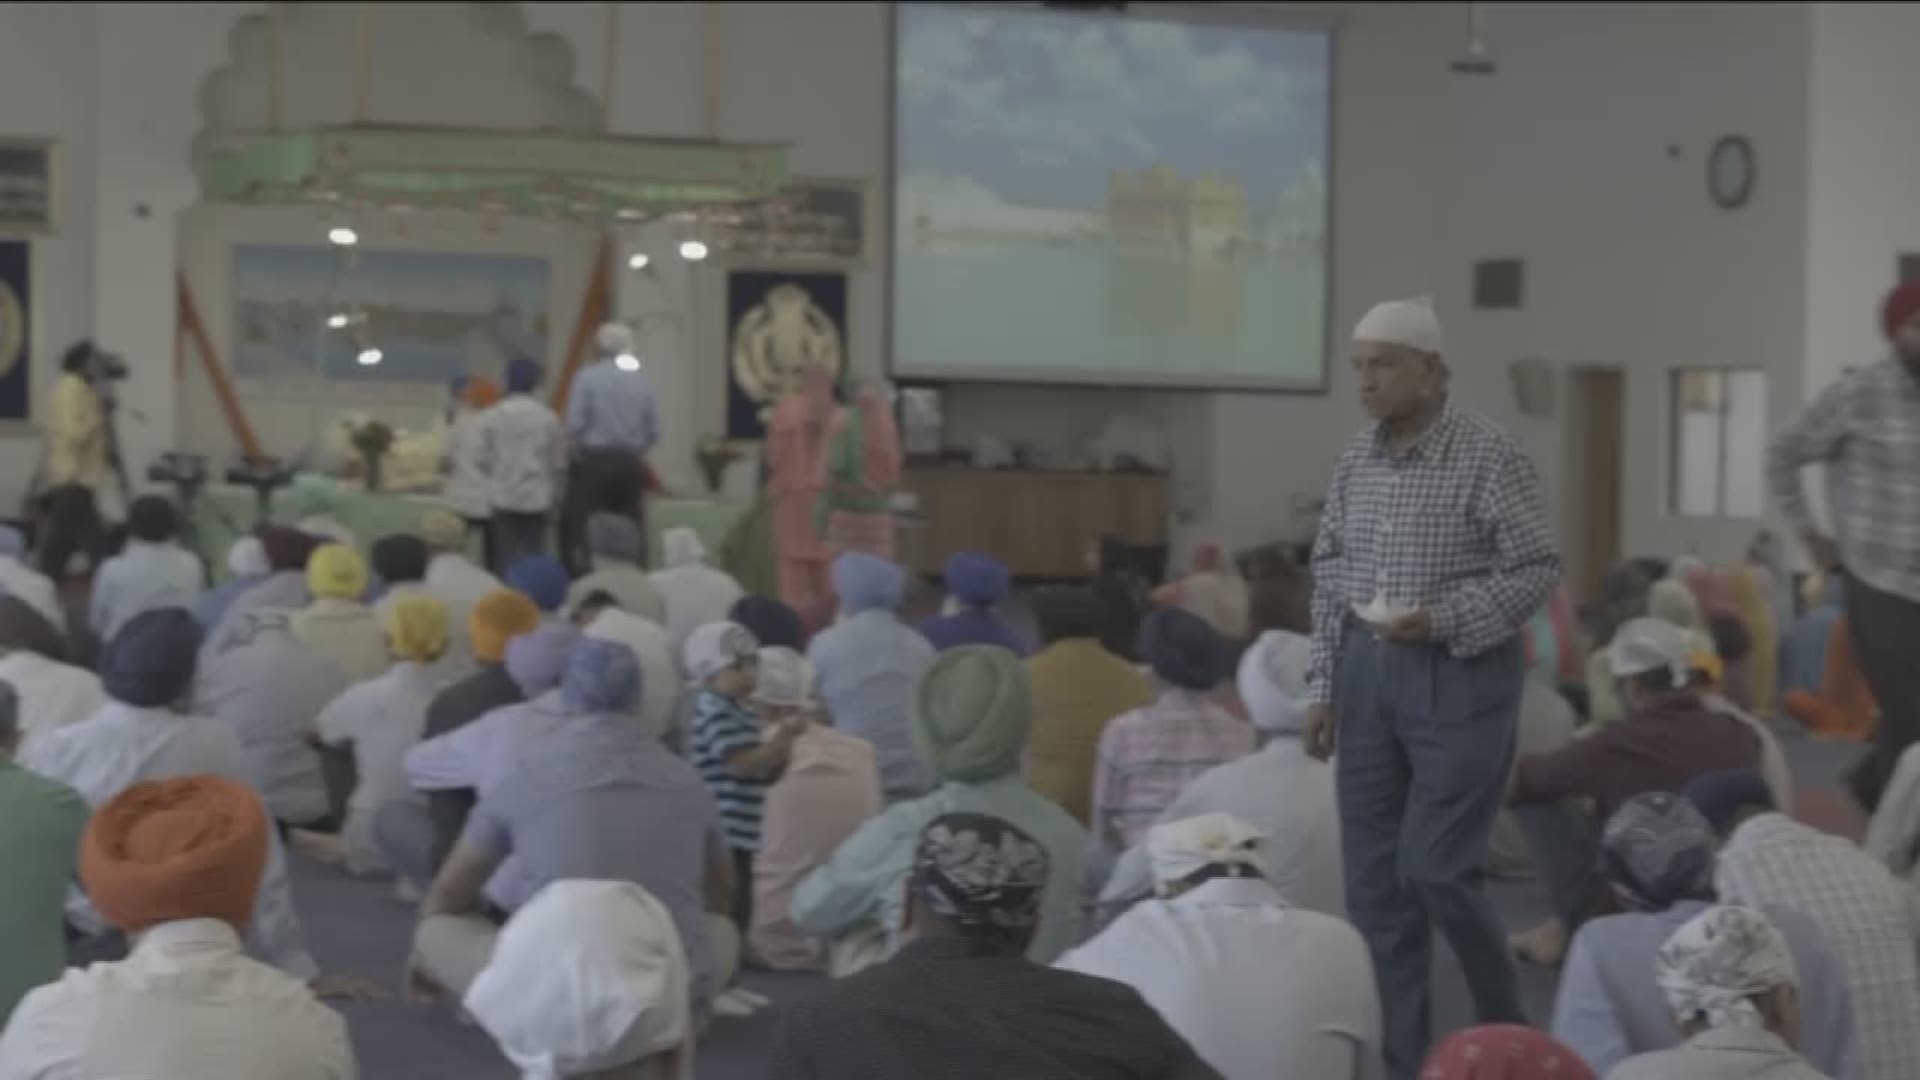 ABC10's looks into what it's like to be Sikh in a post 9/11 world